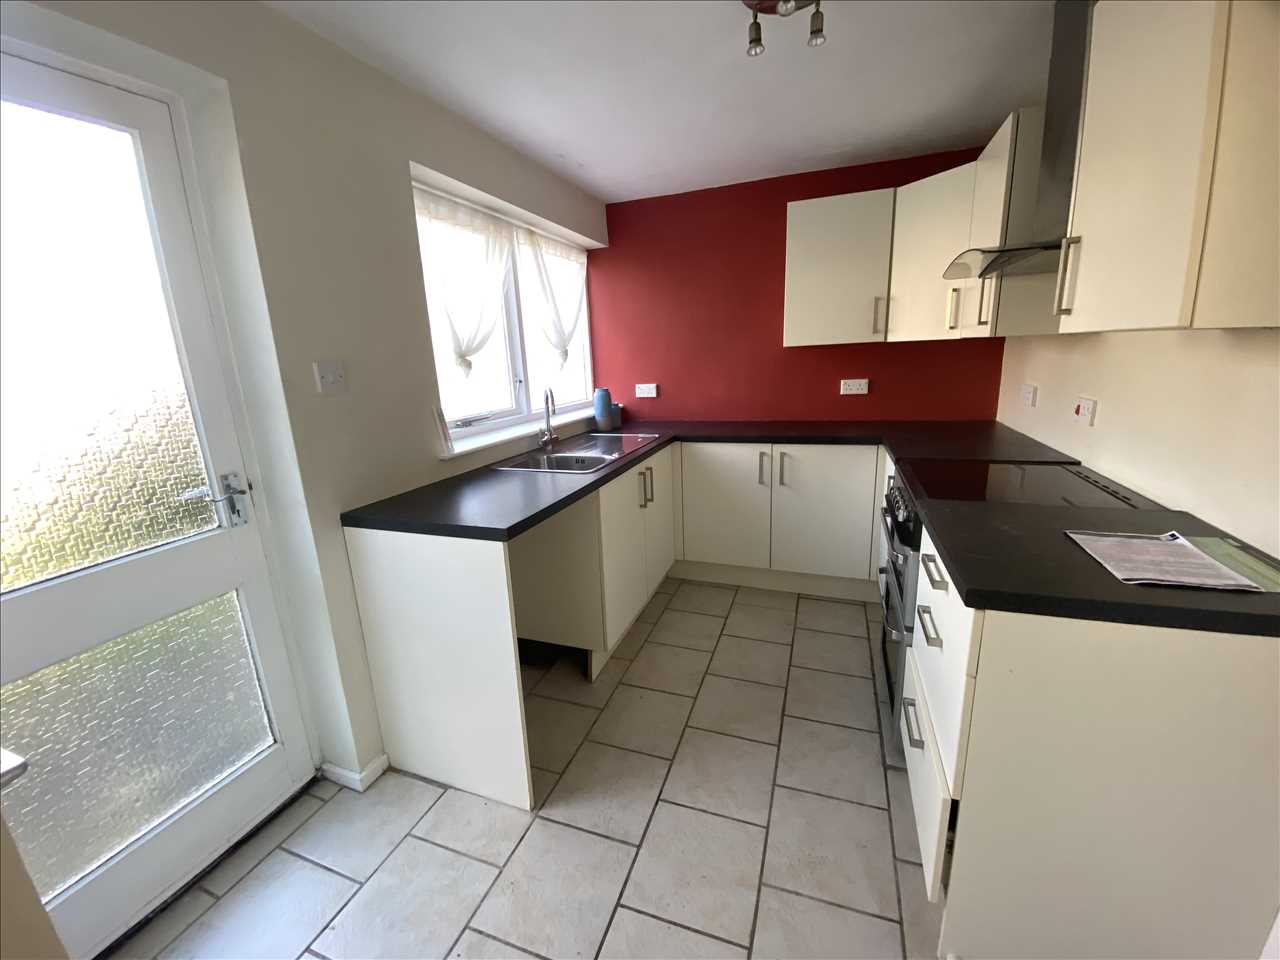 2 bed terraced for sale in Condor Grove, Blackpool 4